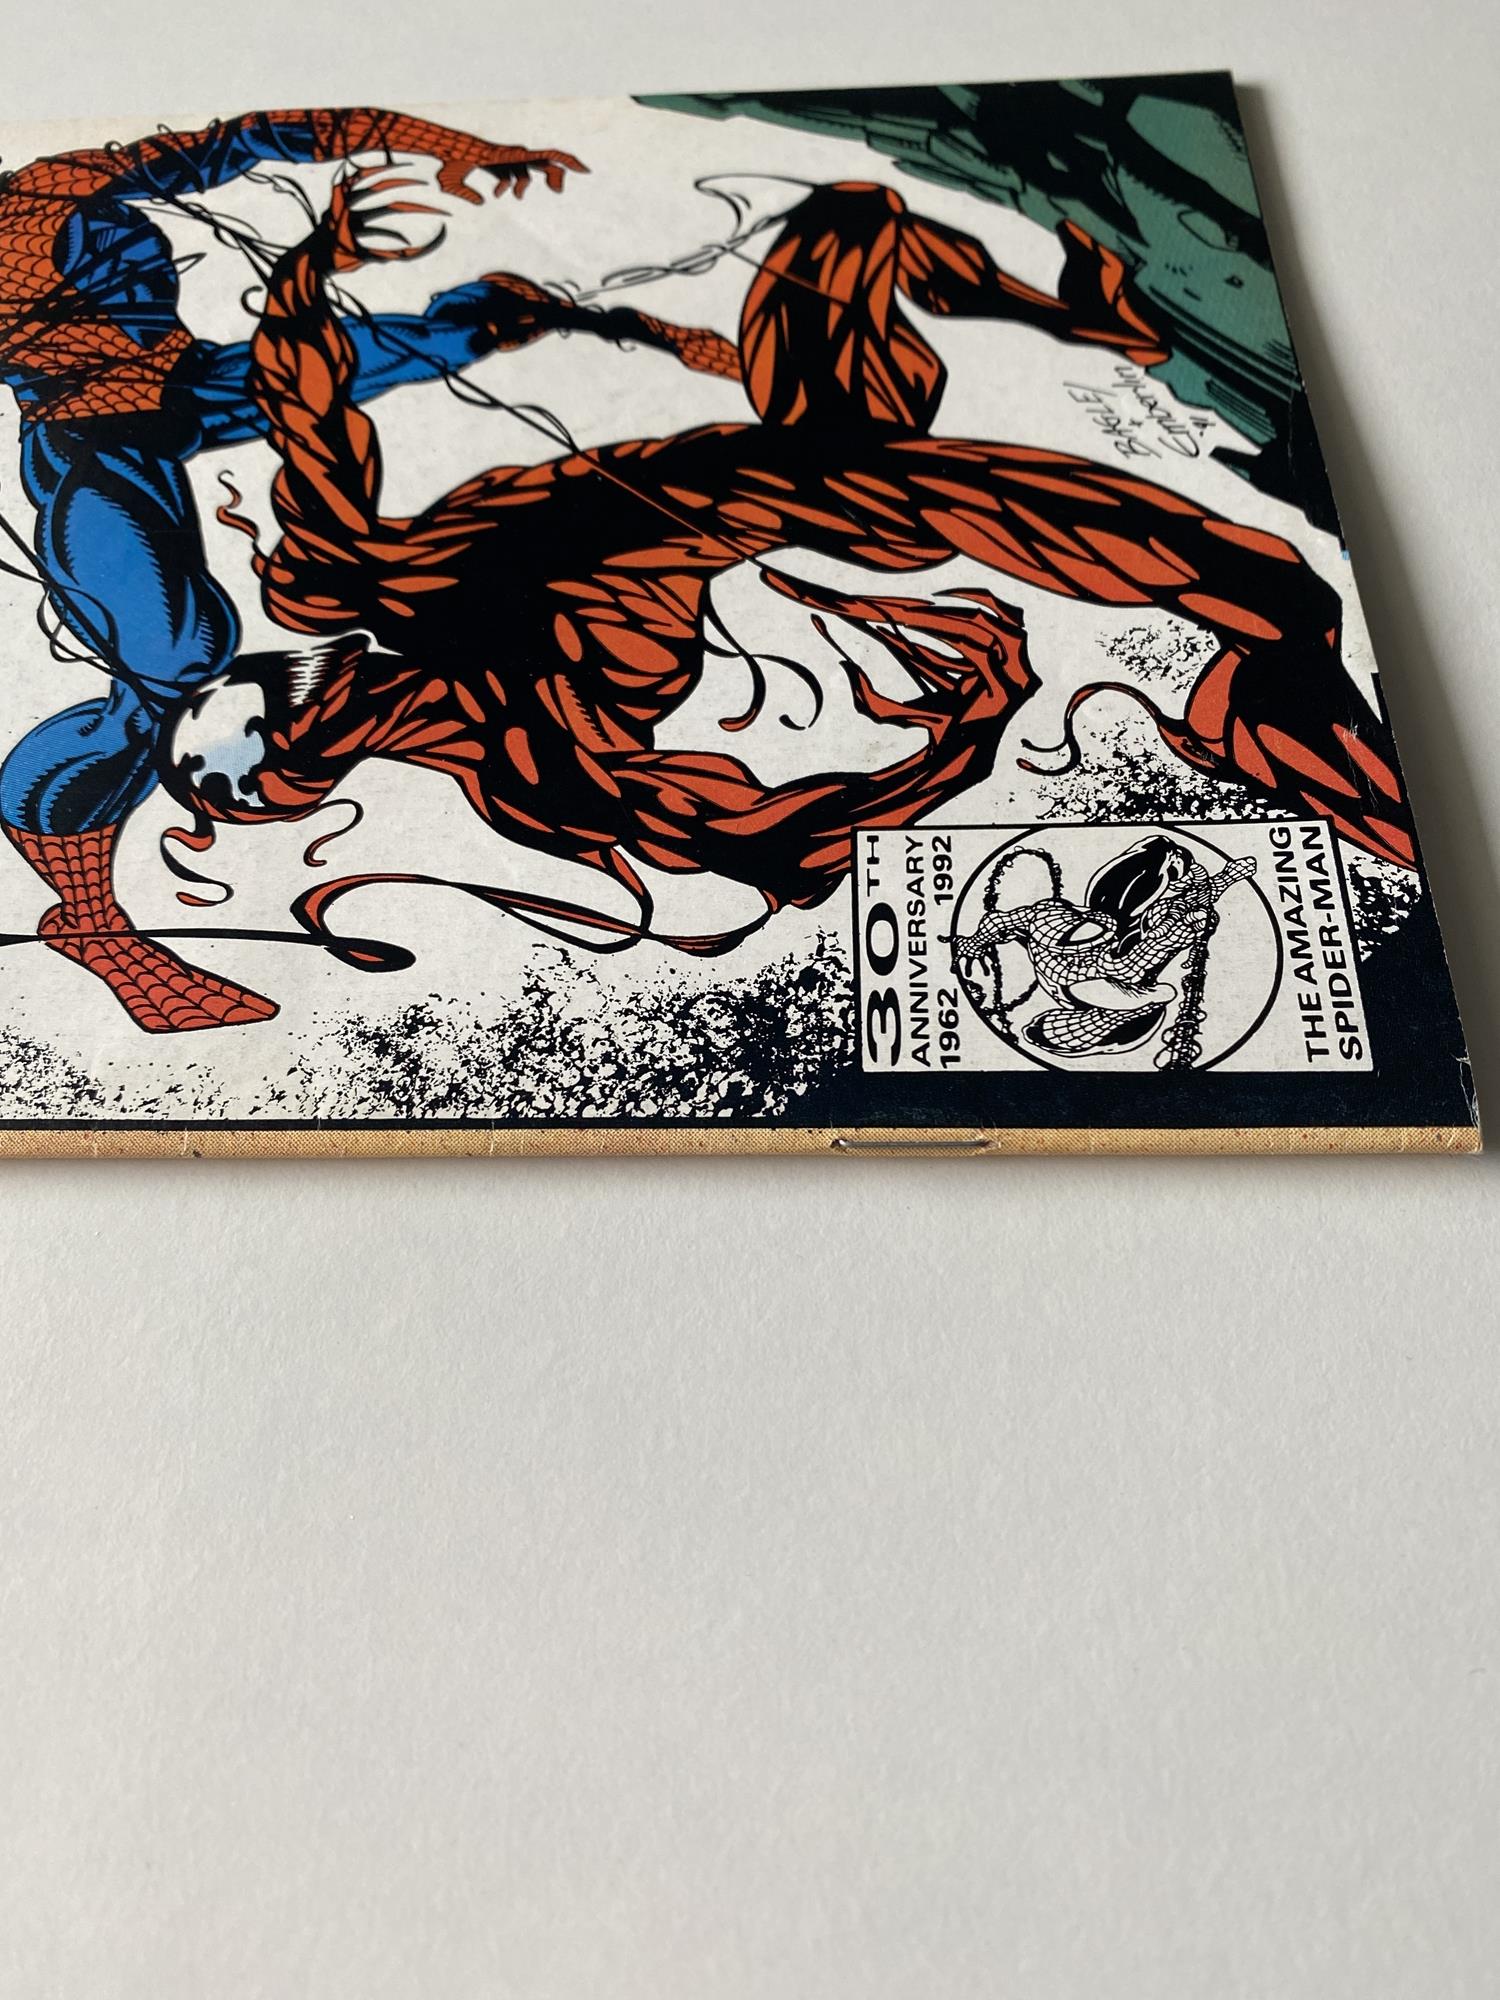 AMAZING SPIDER-MAN # 361 (1992 - MARVEL - Cents/Pence Copy) - First full appearance of Carnage ( - Image 7 of 7